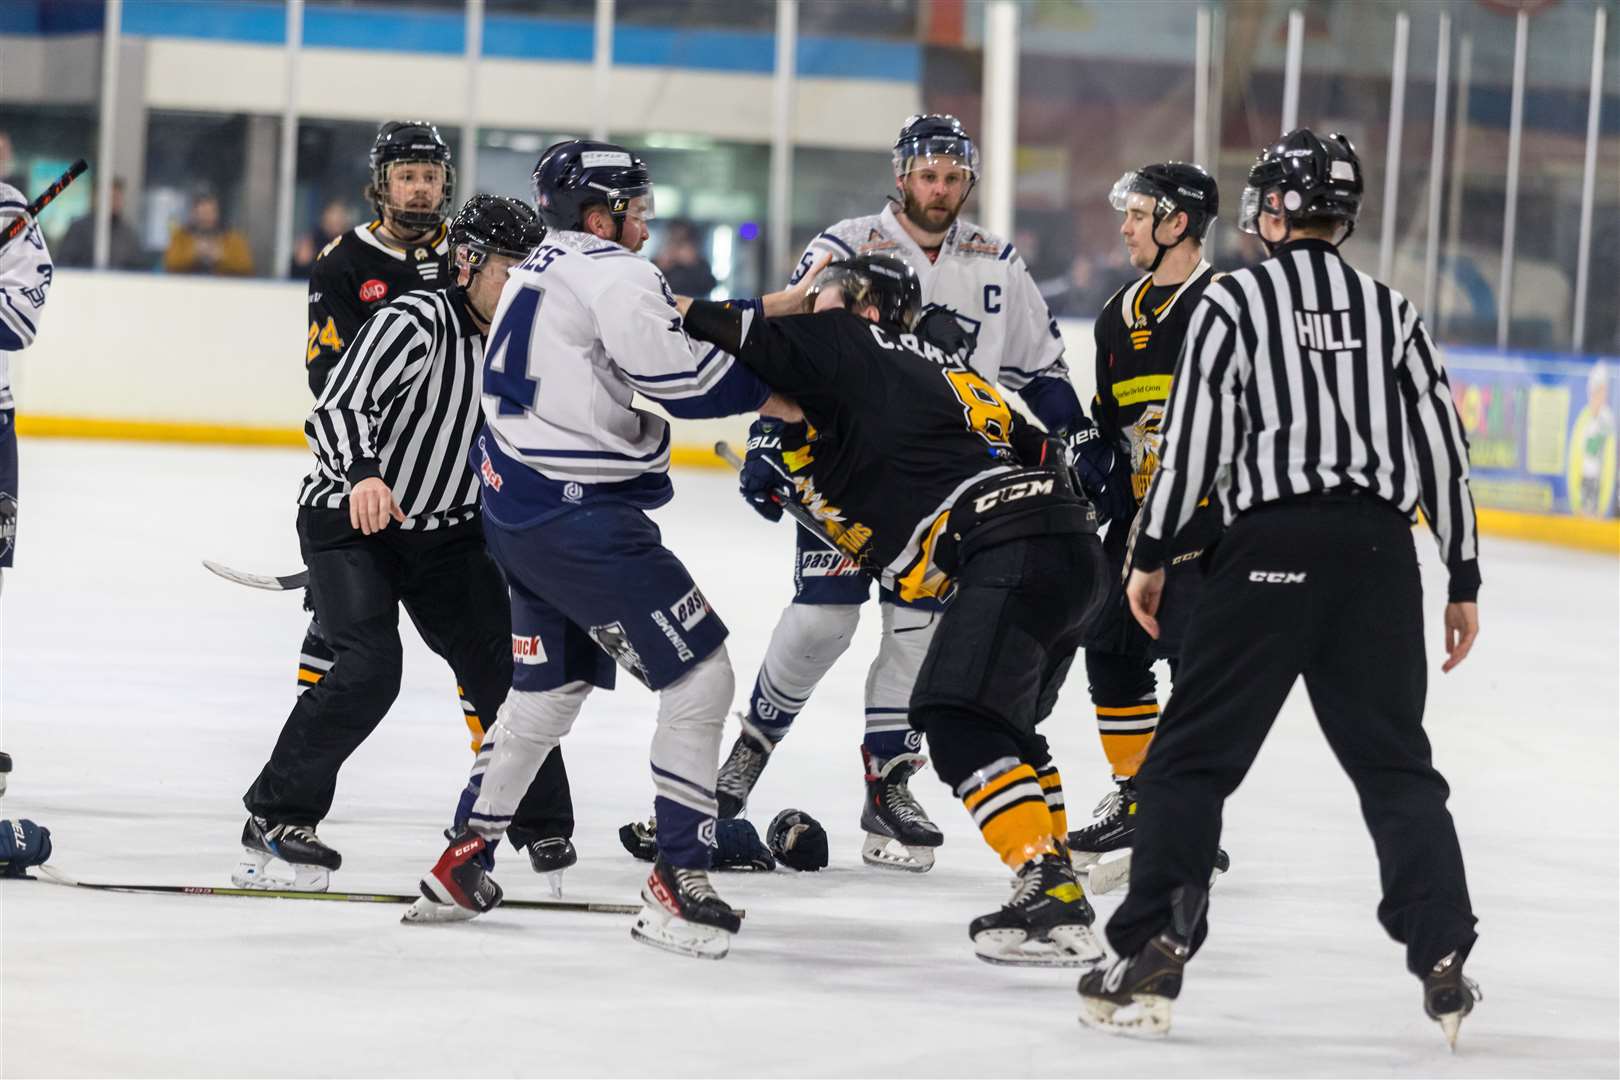 Invicta Dynamos' Michael Stokes in a tussle with Chelmsford Chieftains' Cameron Bartlett Picture: David Trevallion